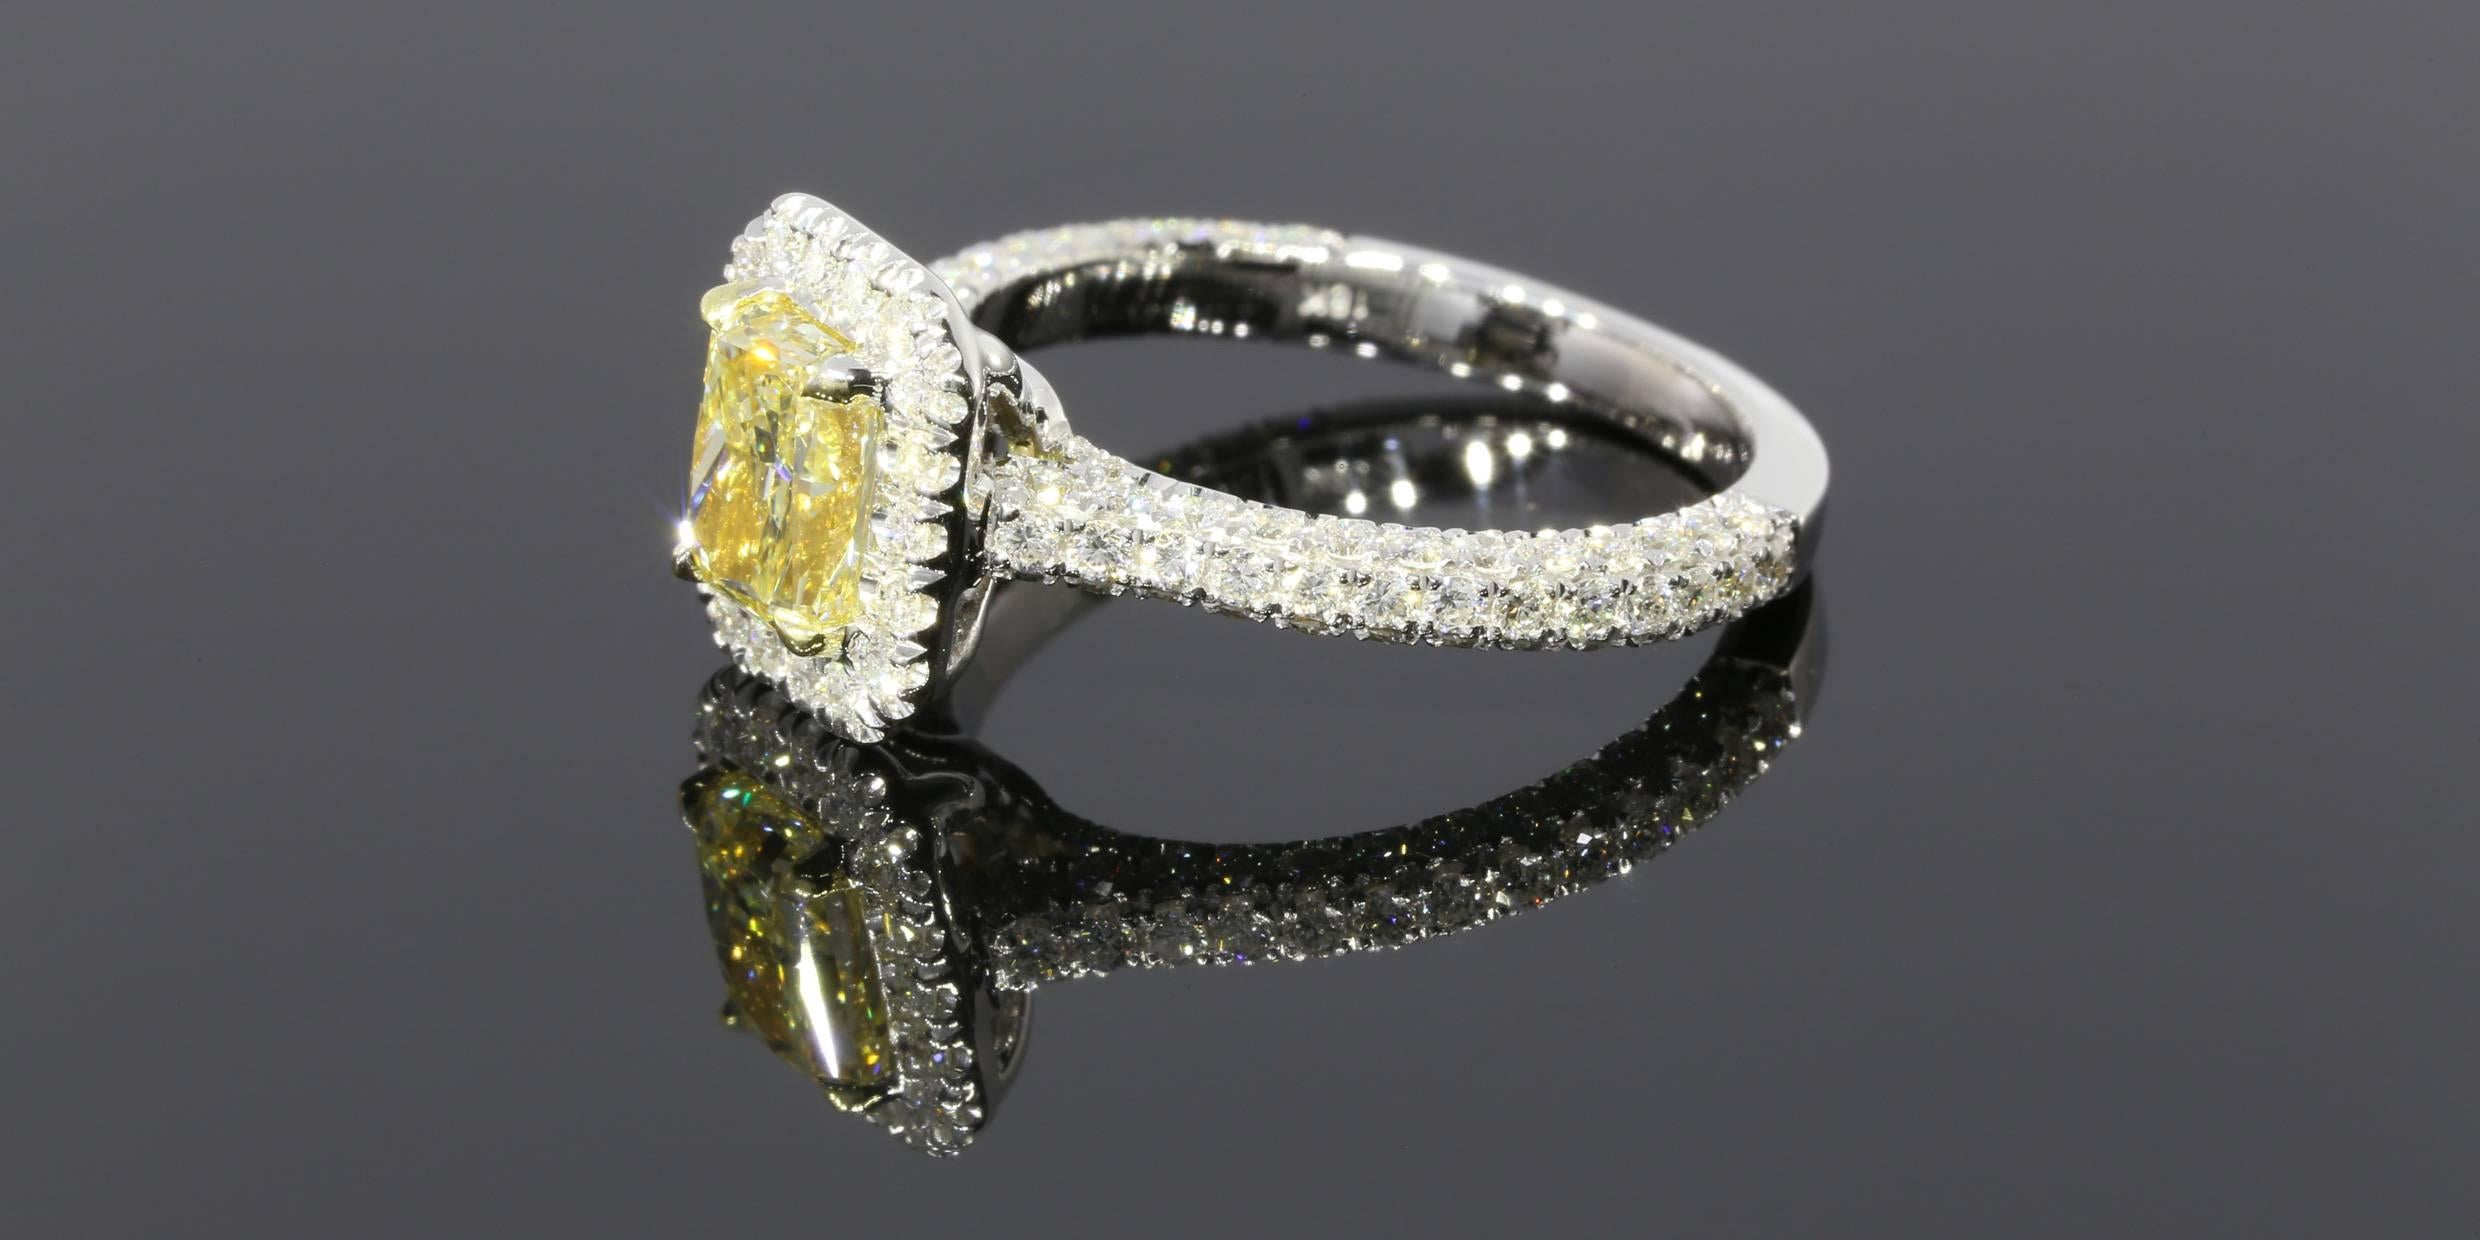 
Canary yellow diamonds have a vibrancy like no other color of diamond. Their warmth evokes the feeling of sunshine and if you are looking to get her an engagement ring that lets her know how much she brightens up your life, then this is the ring